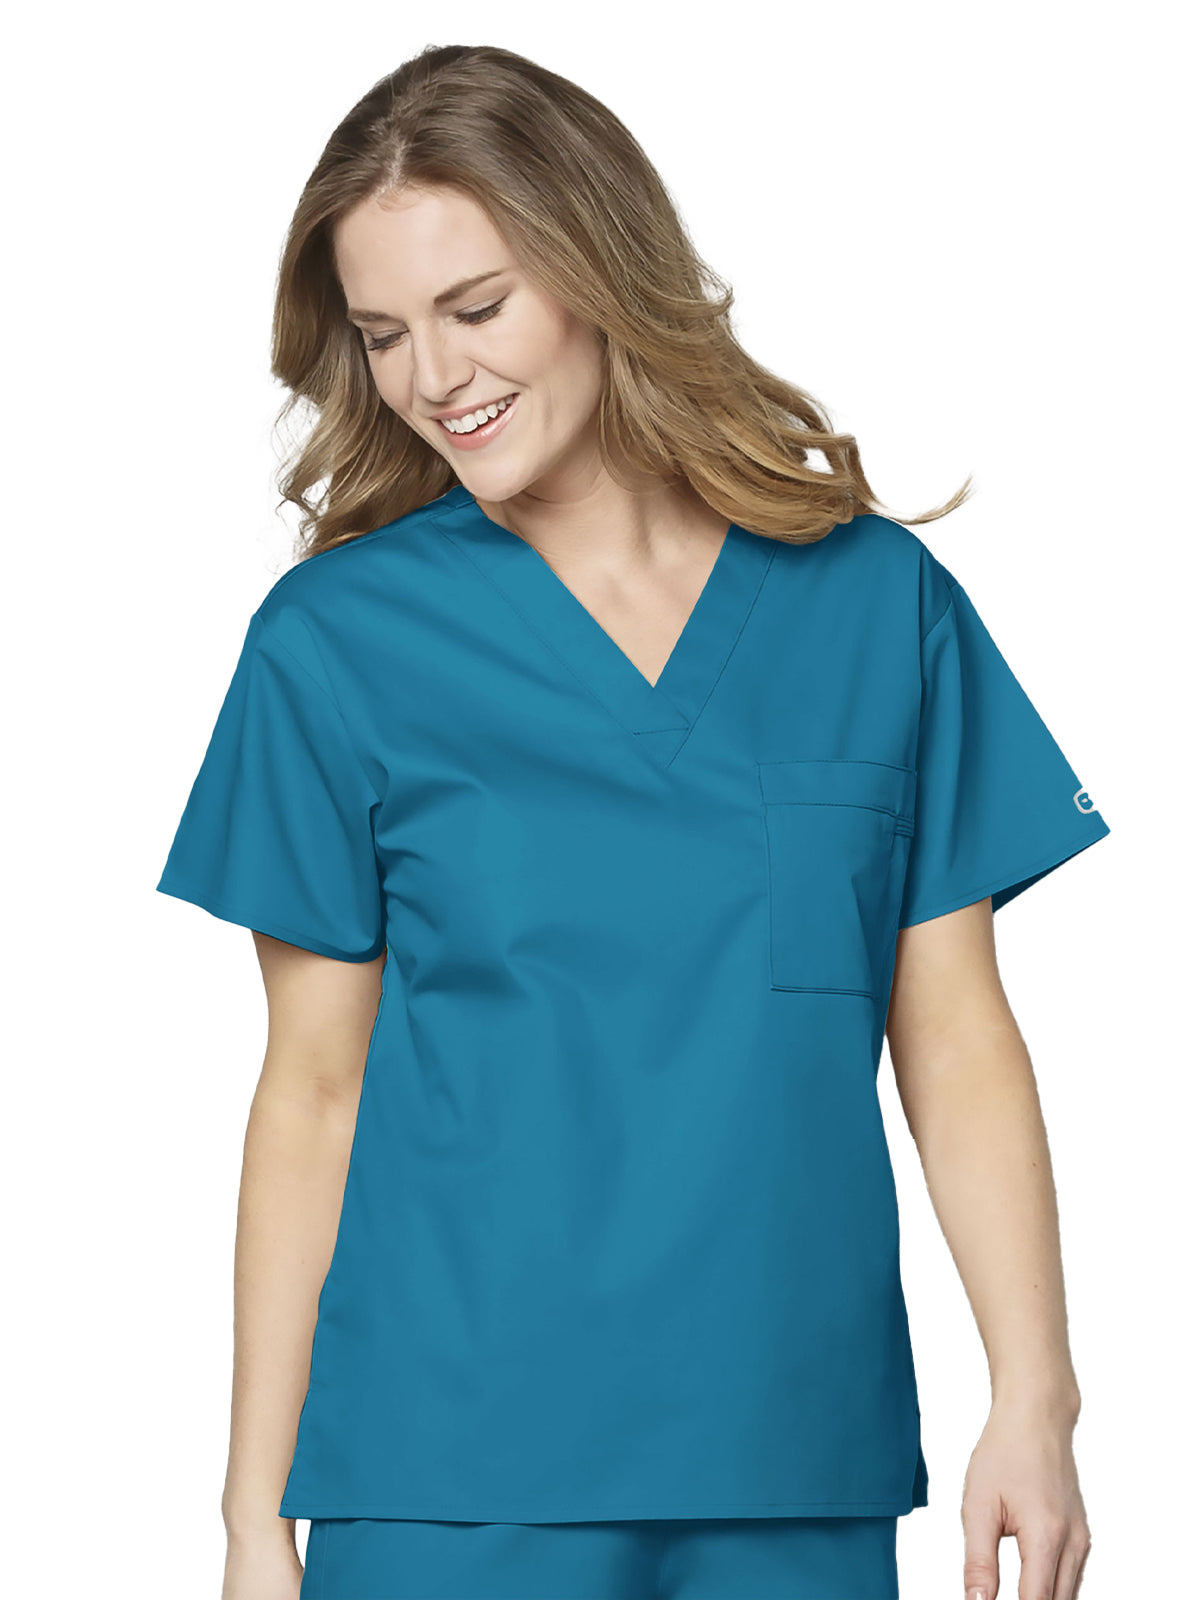 Unisex Double Chest Pocket Top - 100 - Teal